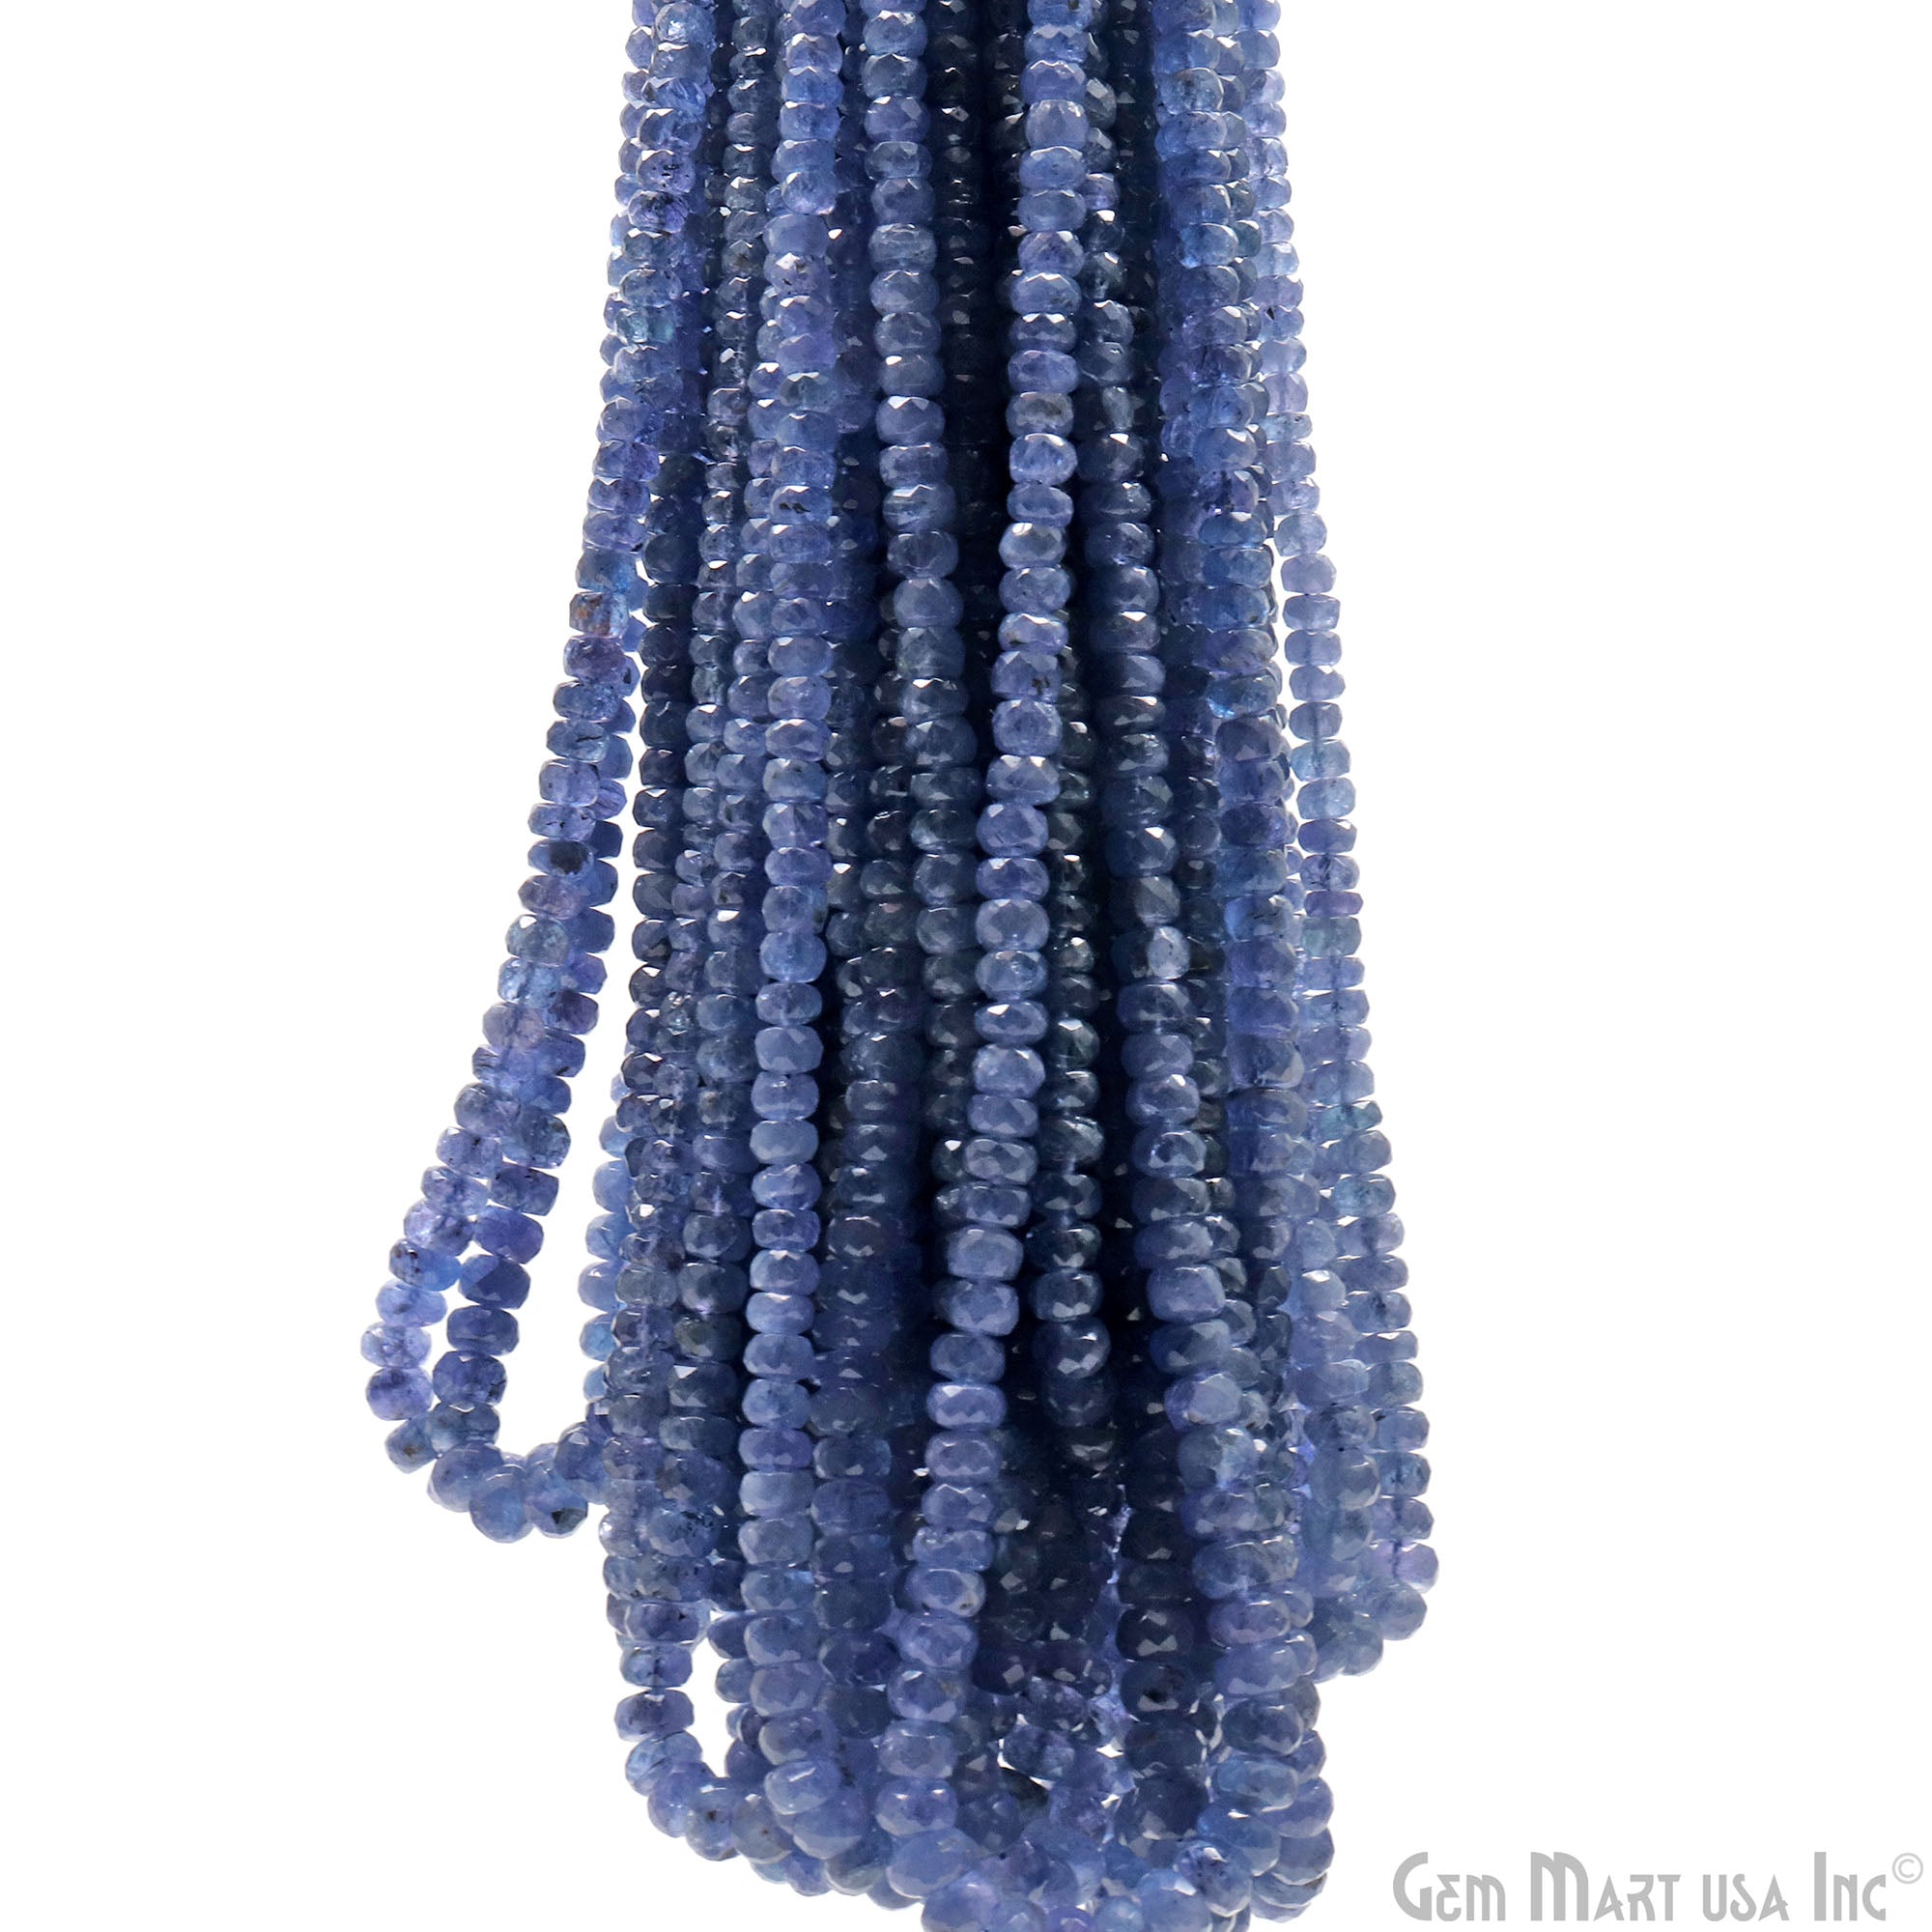 Tanzanite Faceted 5-6mm Round Rondelle Strand Beads 16 Inch